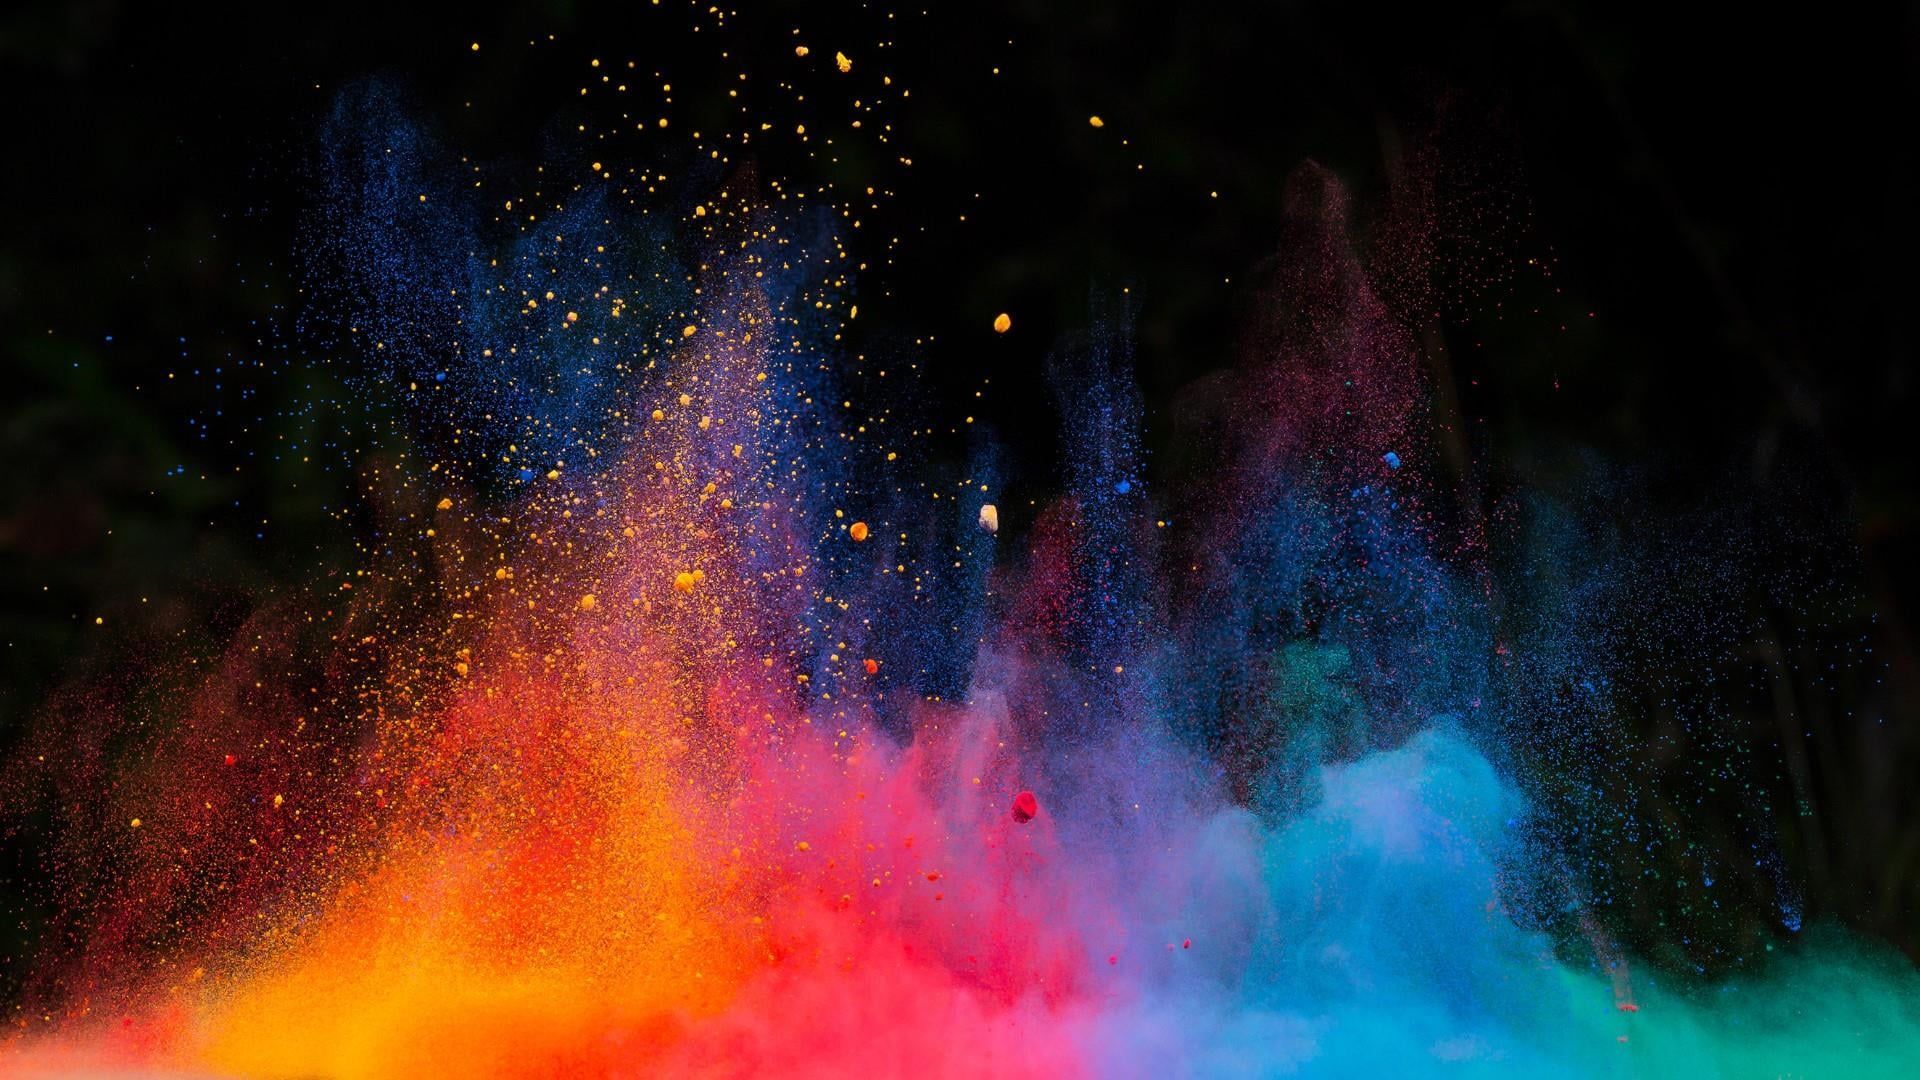 colors #explosion #colorful #powder #colored #dust special effects #multicolor P #wallpaper #hdwallpaper #desktop. Color dust, Dust explosion, Qhd wallpaper